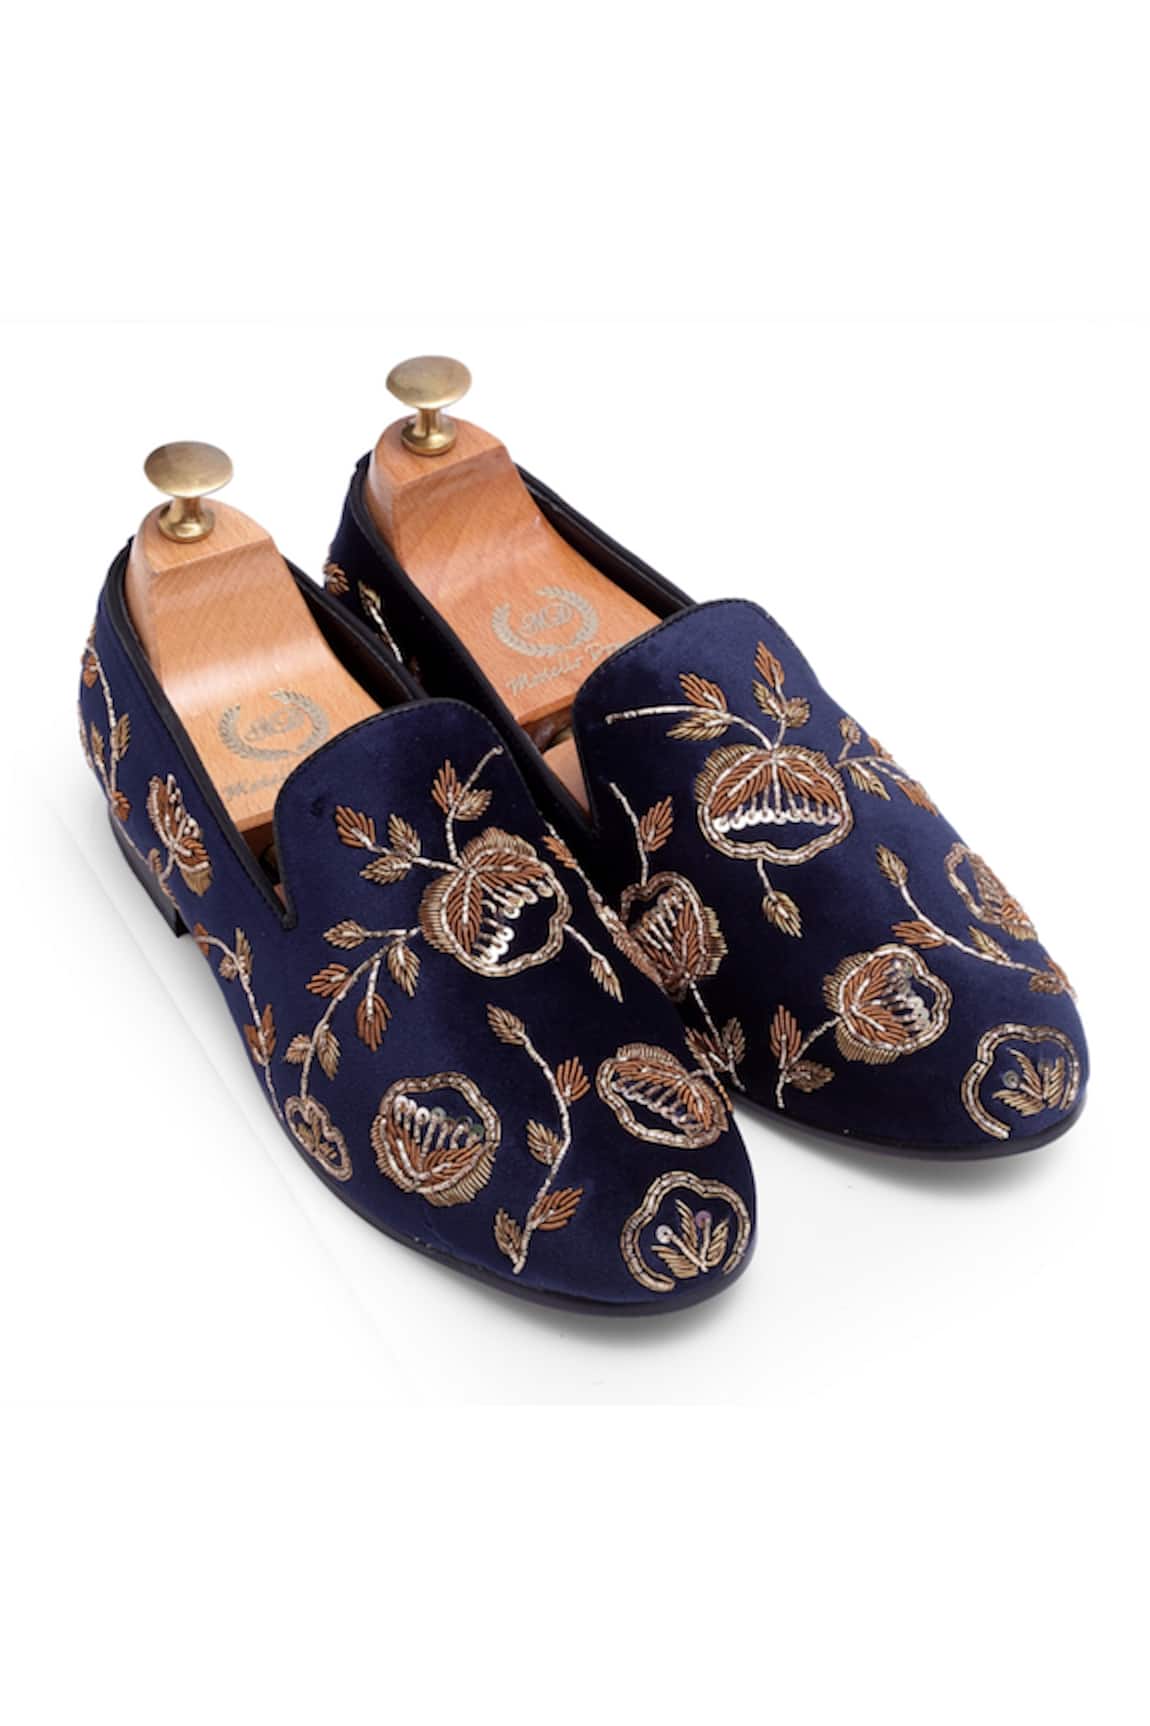 Domani Floral Embroidered Loafers